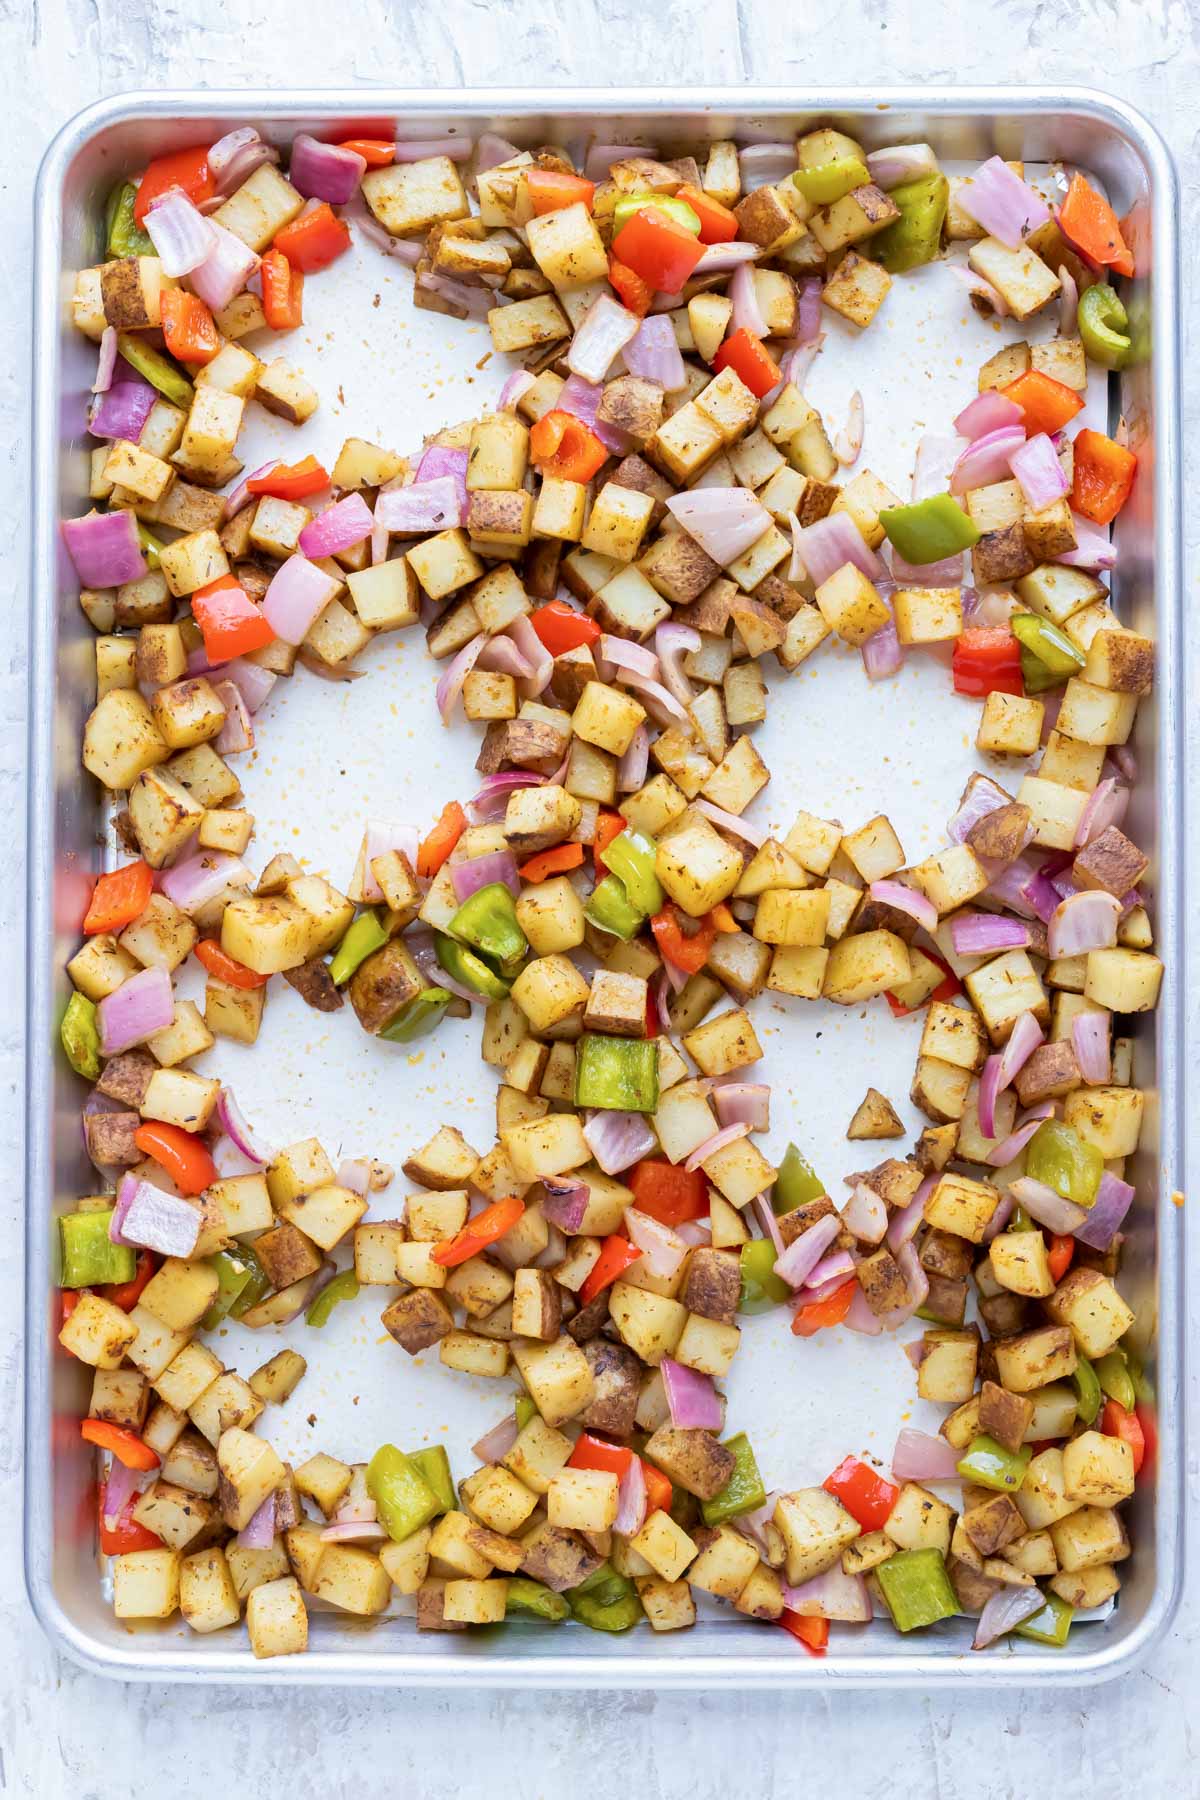 8 wells are made in a sheet pan with veggies